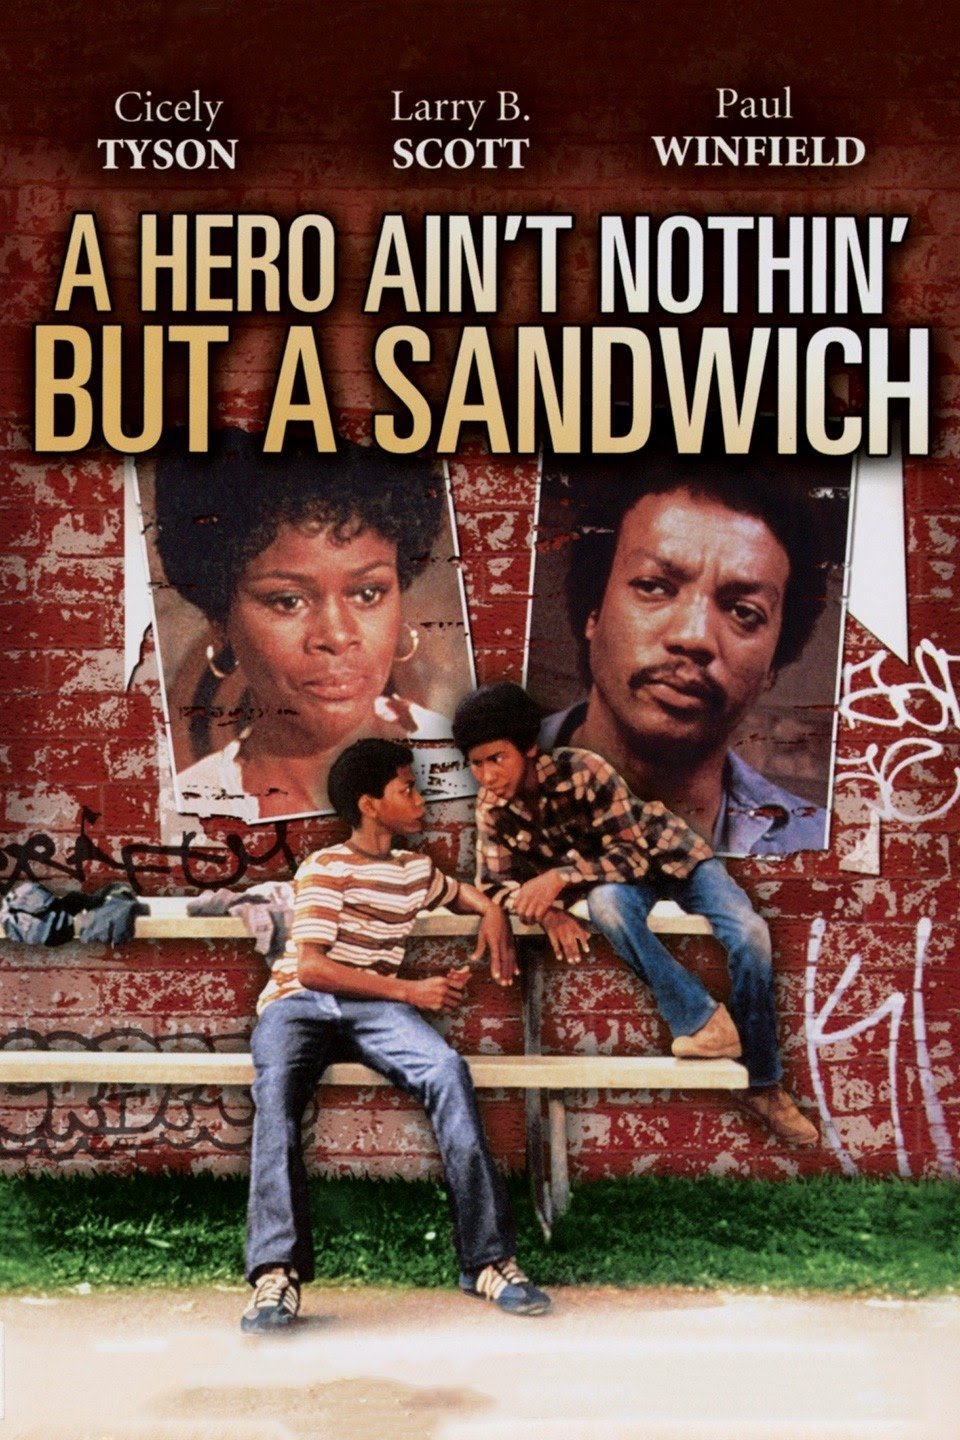 Poster of the movie A Hero Ain't Nothin' But a Sandwich